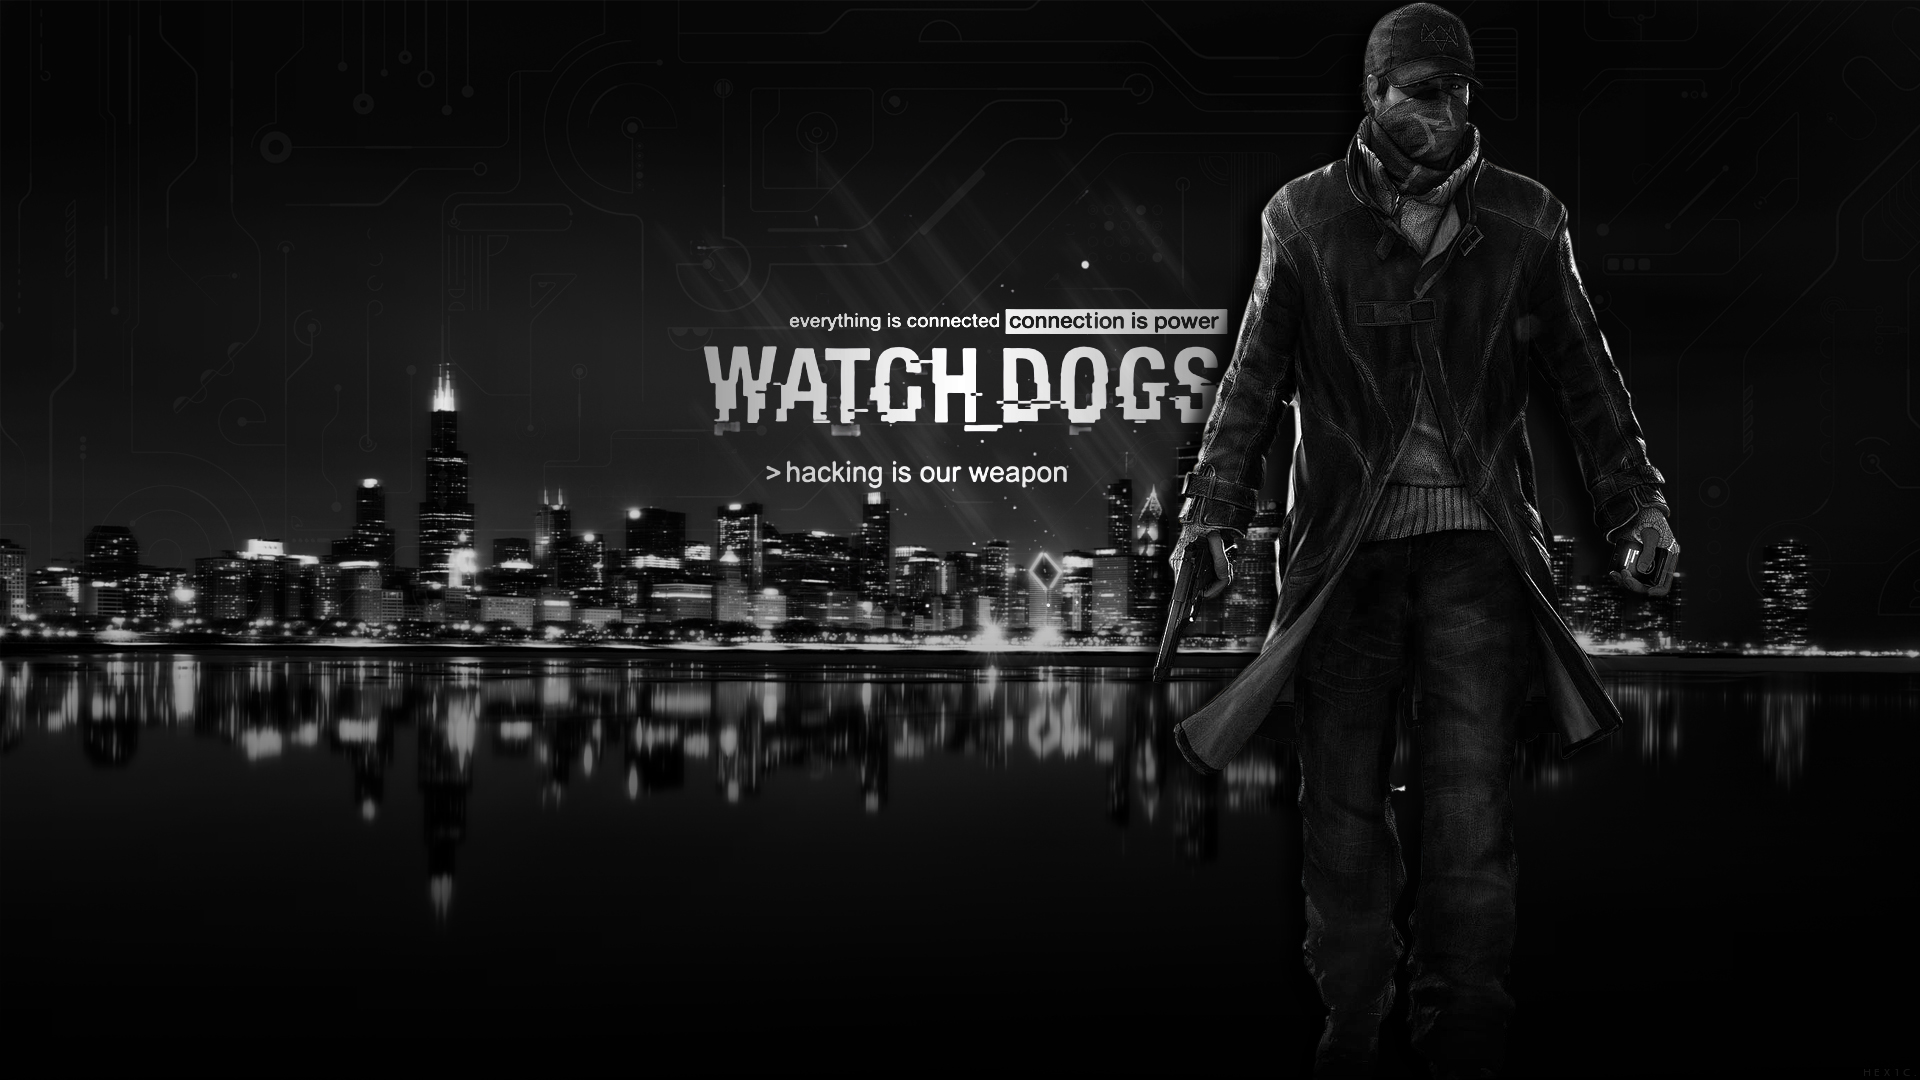 Watch Dogs Wallpaper HD by solidcell on DeviantArt